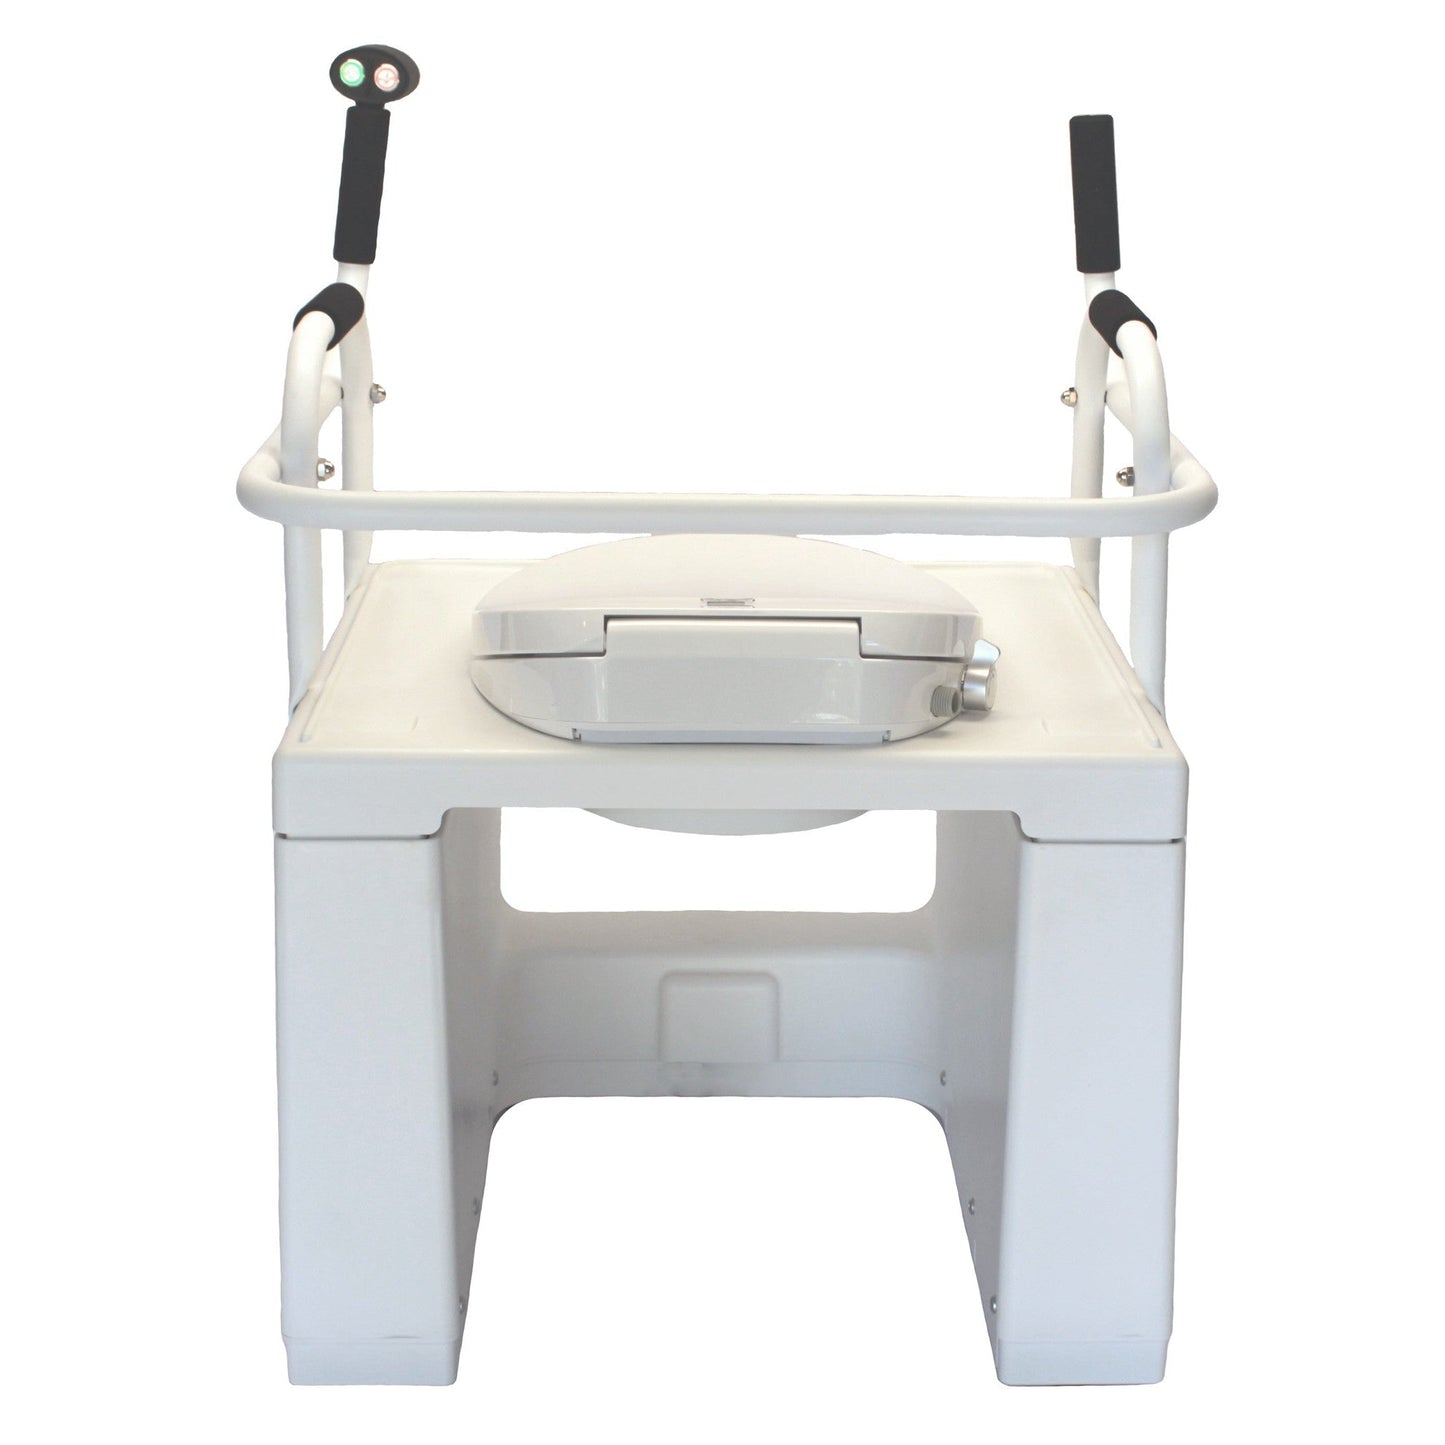 Throne Buttler 37" Powered Toilet Lift Chair With 26" Standard Handle Bar and Upgraded Soft Close Toilet Seat